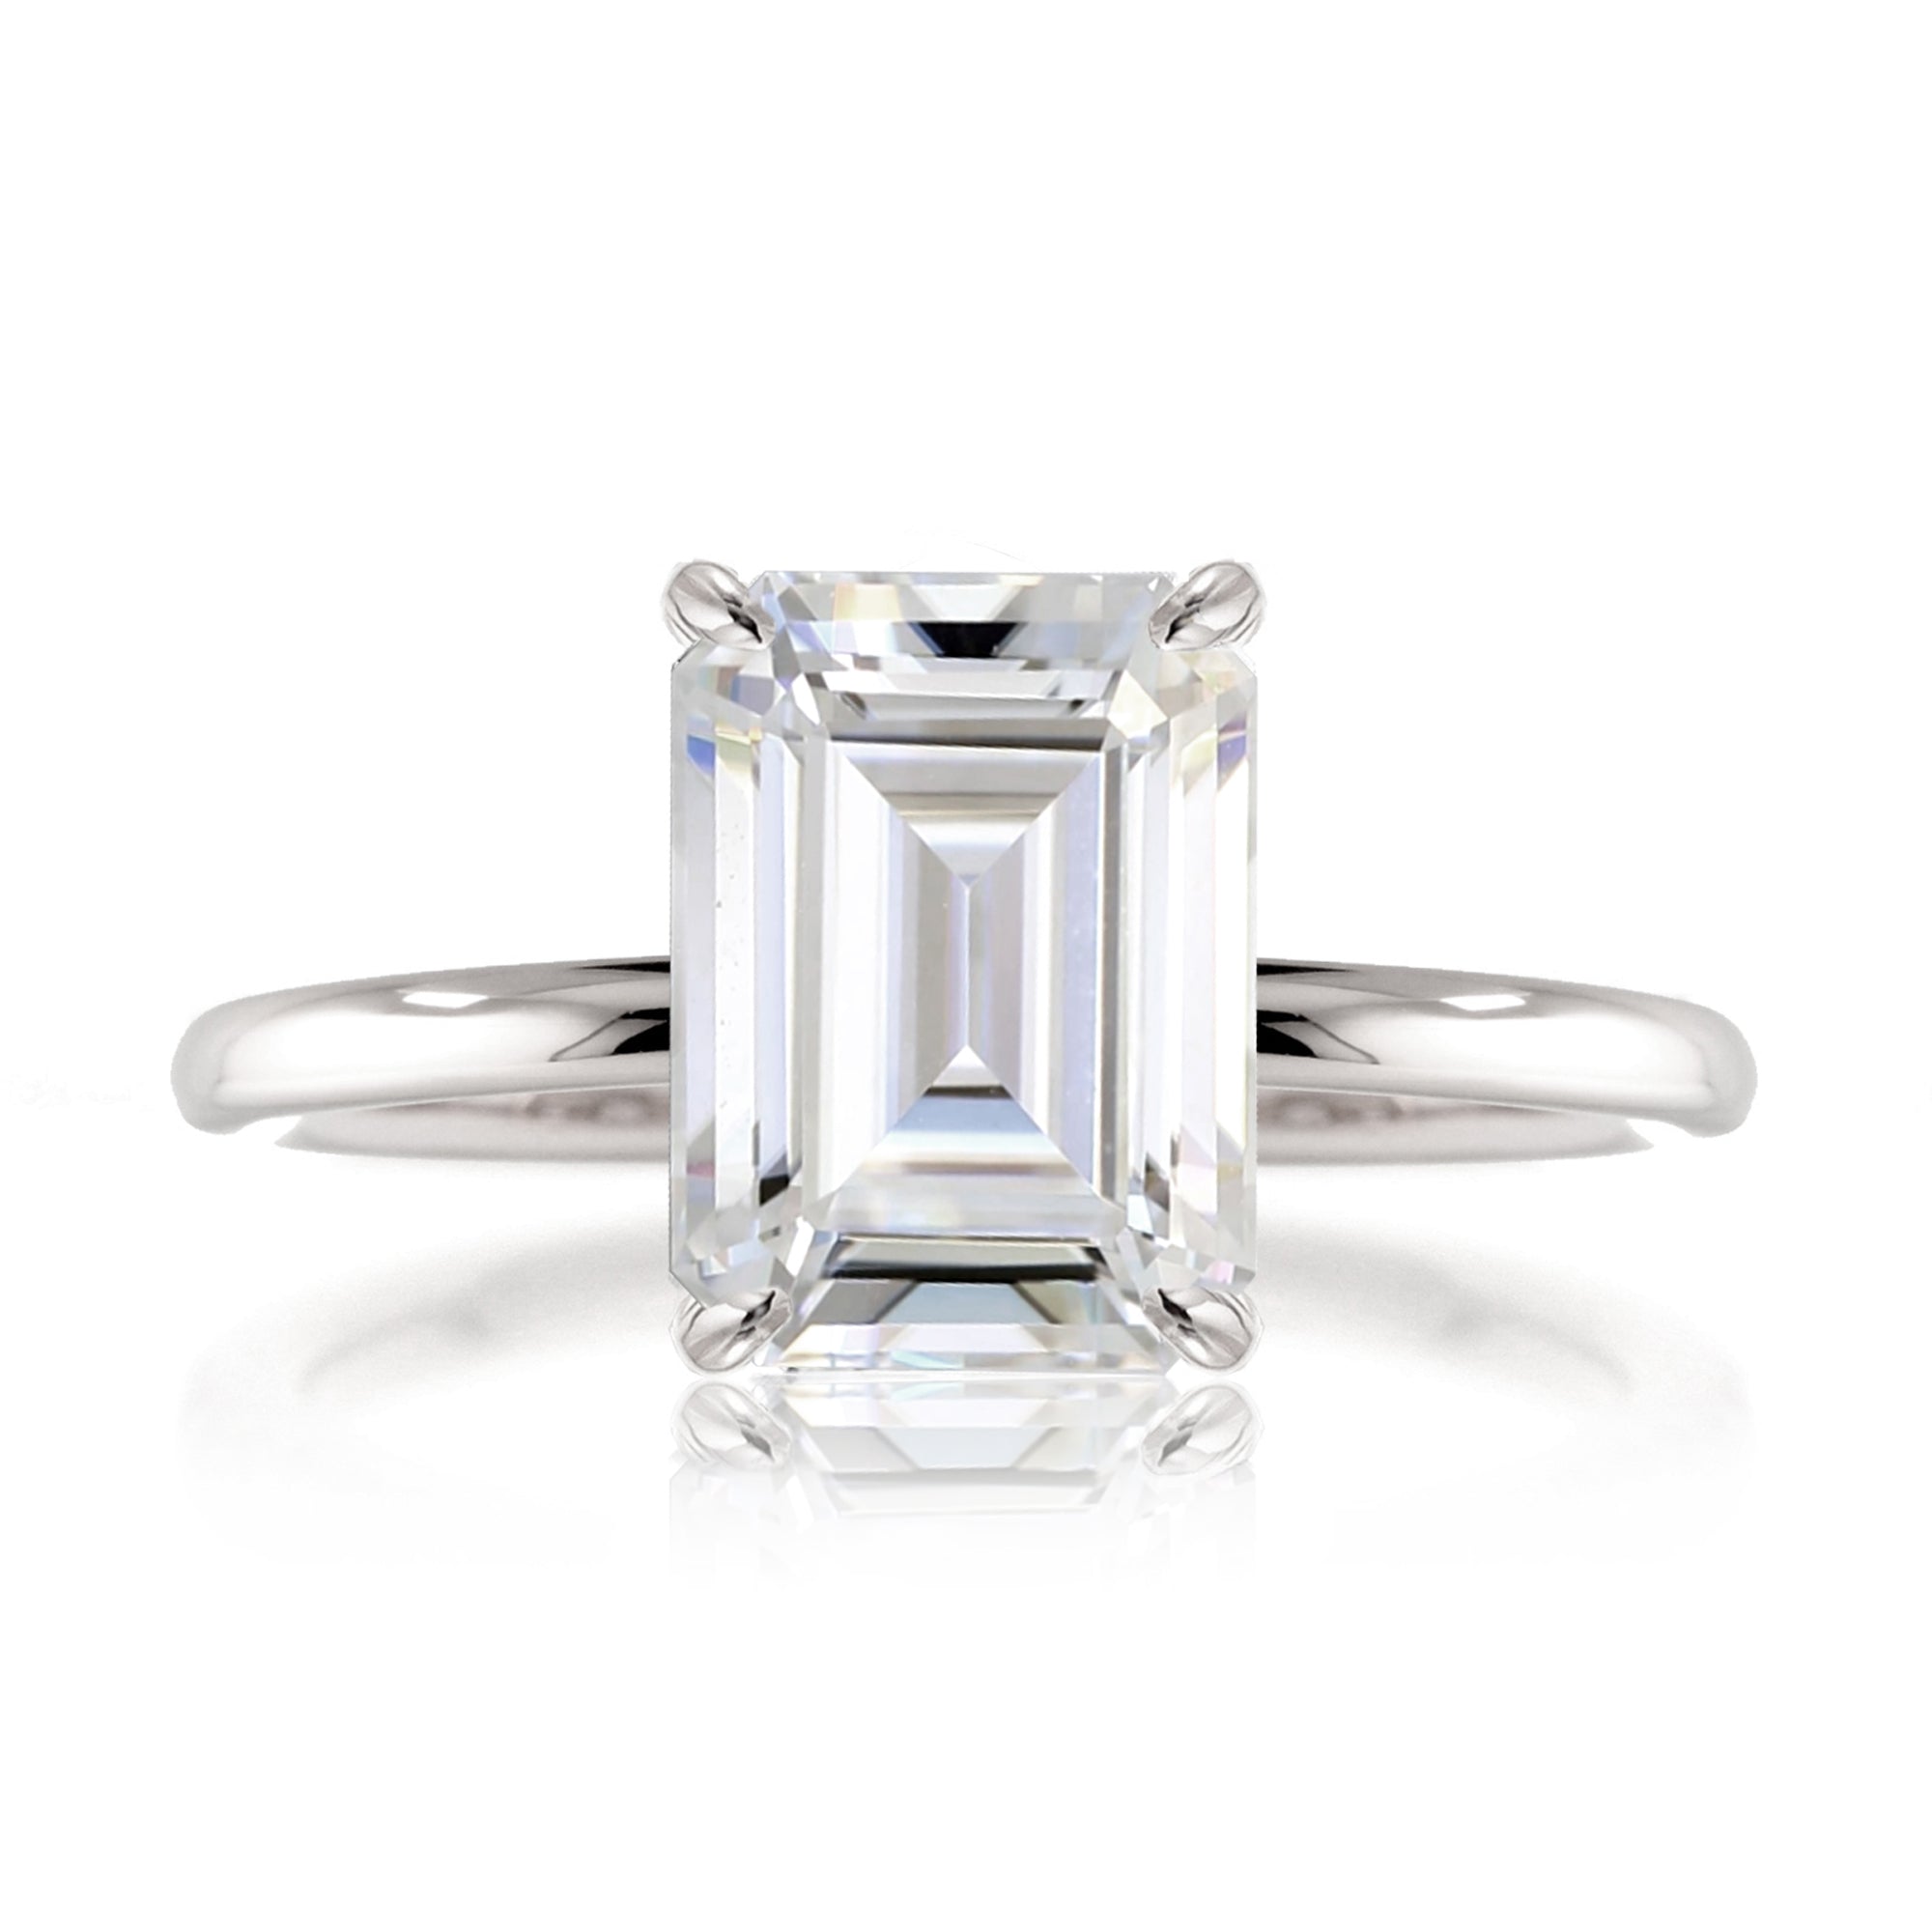 Emerald cut moissanite solid band engagement ring white gold - The Ava